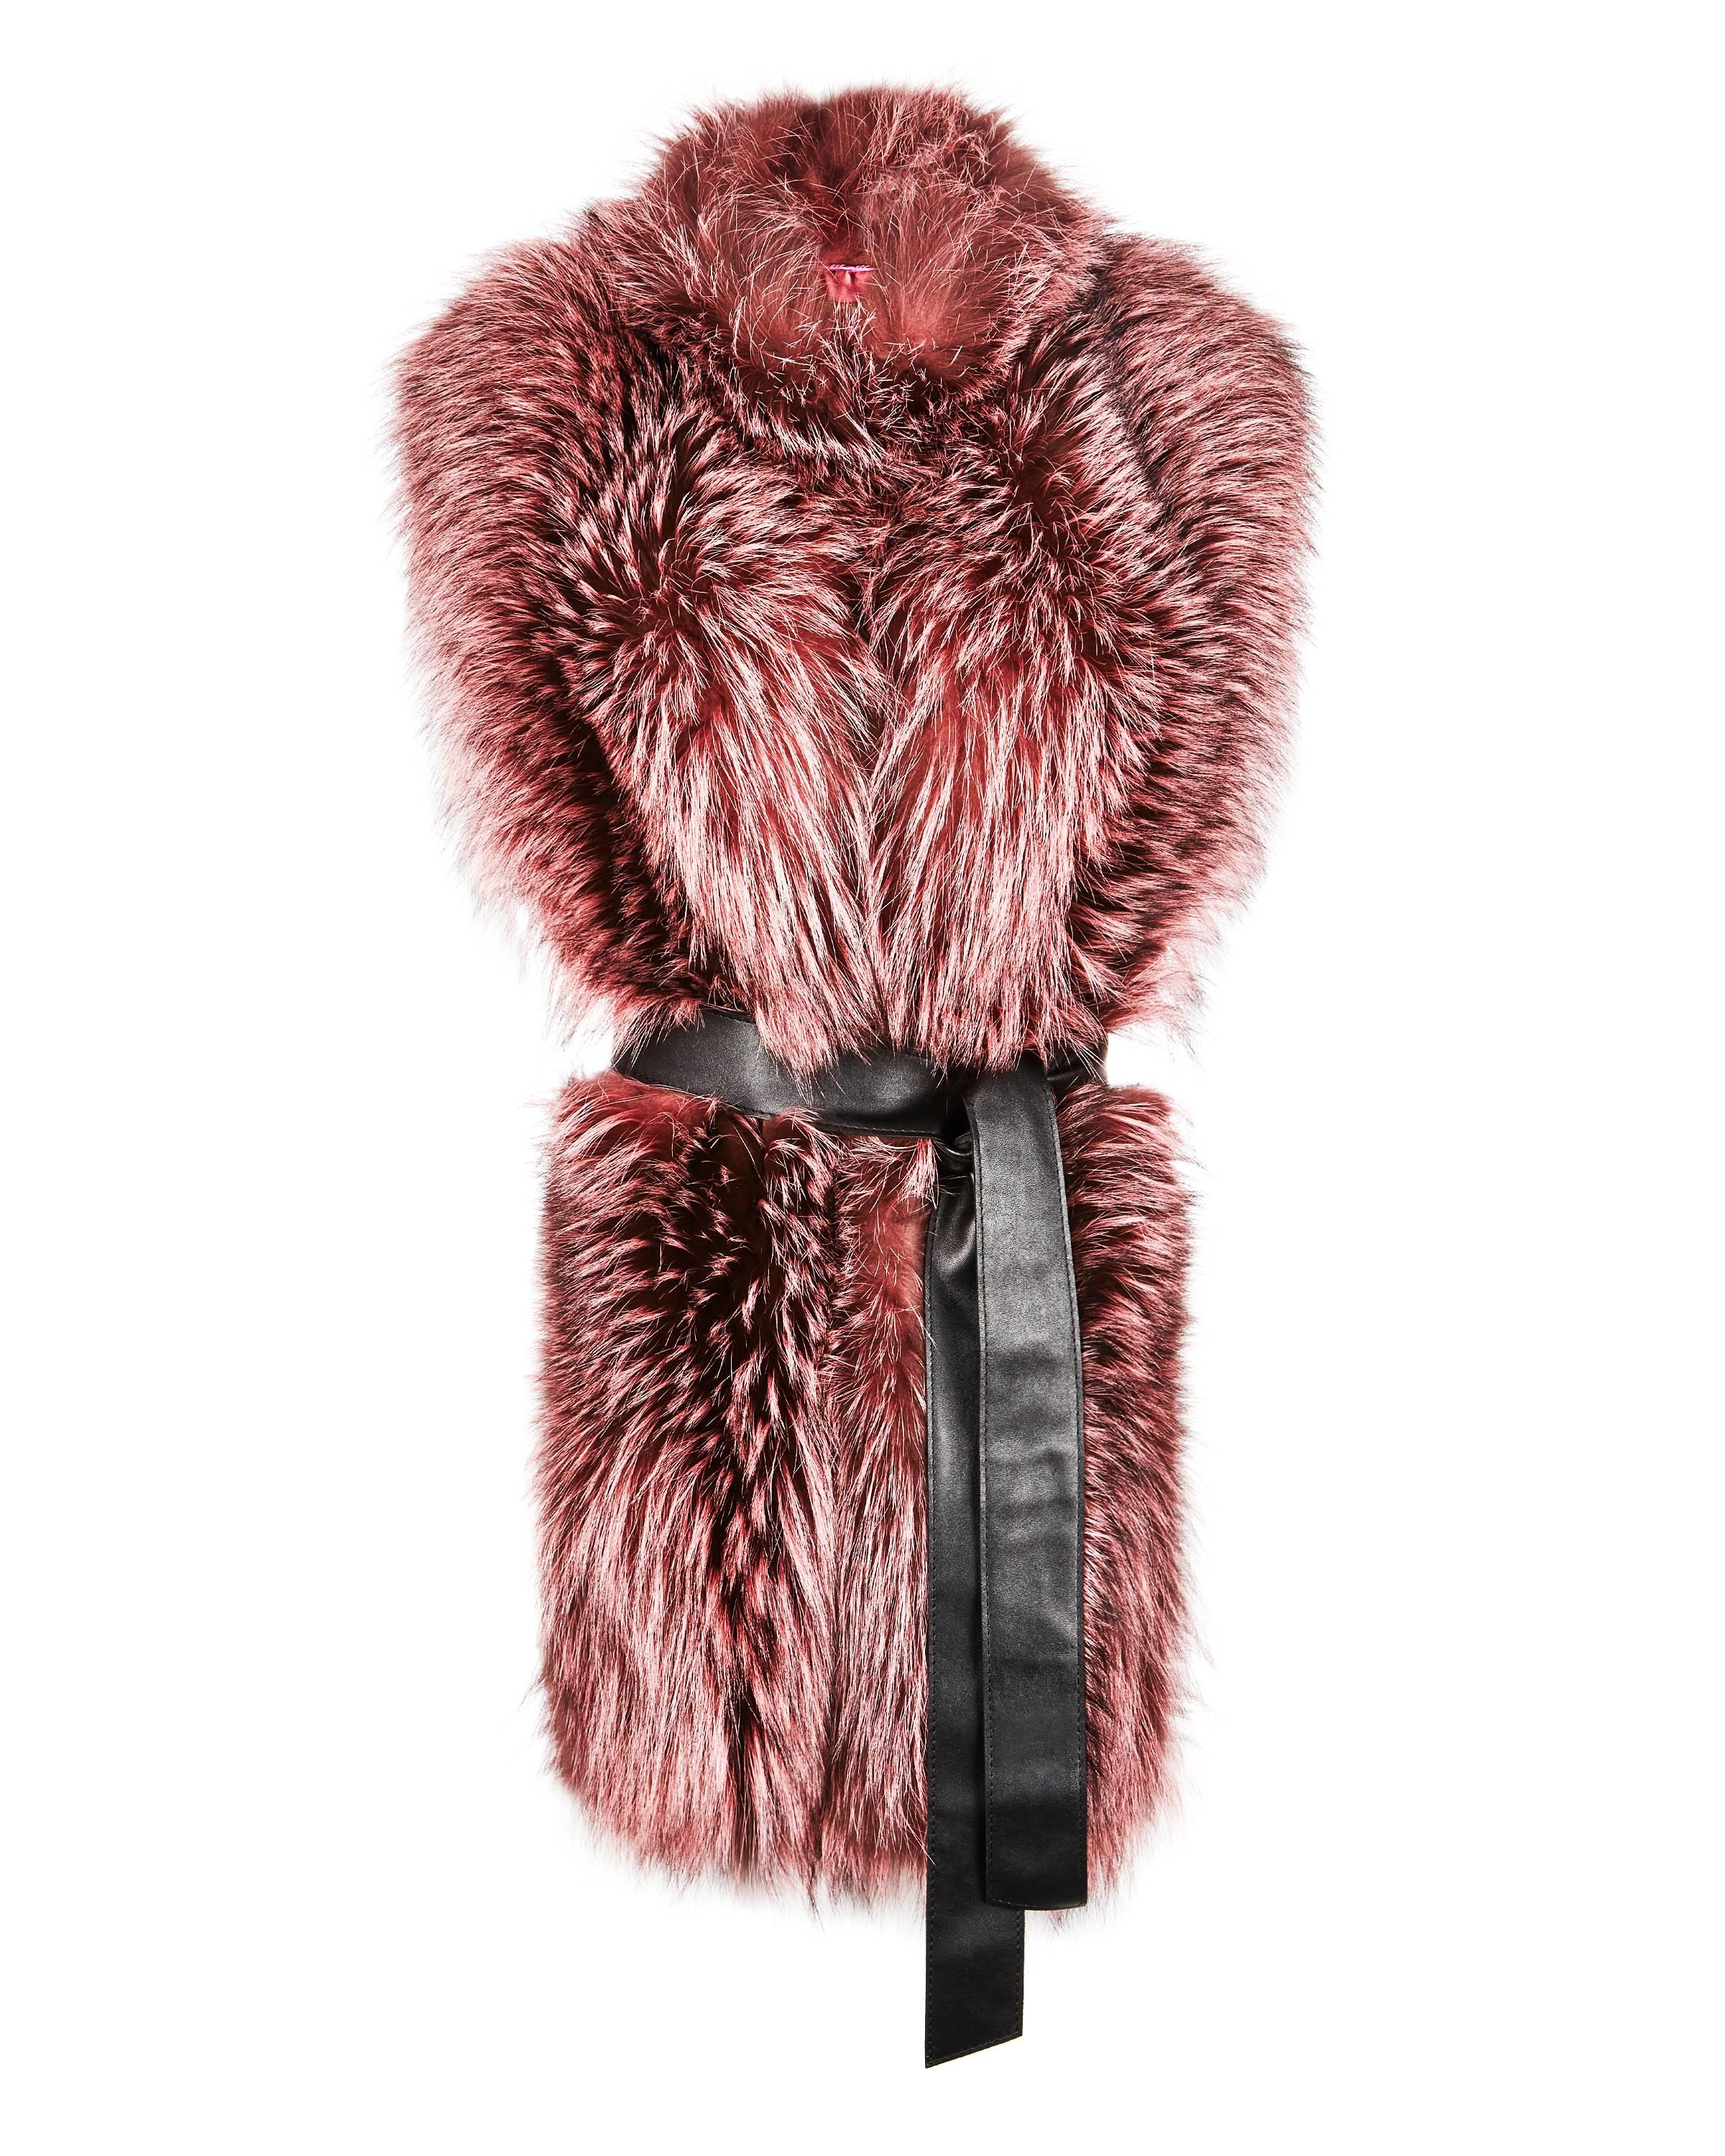 Verheyen London Nehru Collar Stole Rose Quartz Pink Fox Fur - Brand New 

The Nehru Collar Stole is Verheyen London’s wardrobe “must have” for effortless style and glamour. Crafted in the finest dyed silver fox and lined in coloured silk satin, this